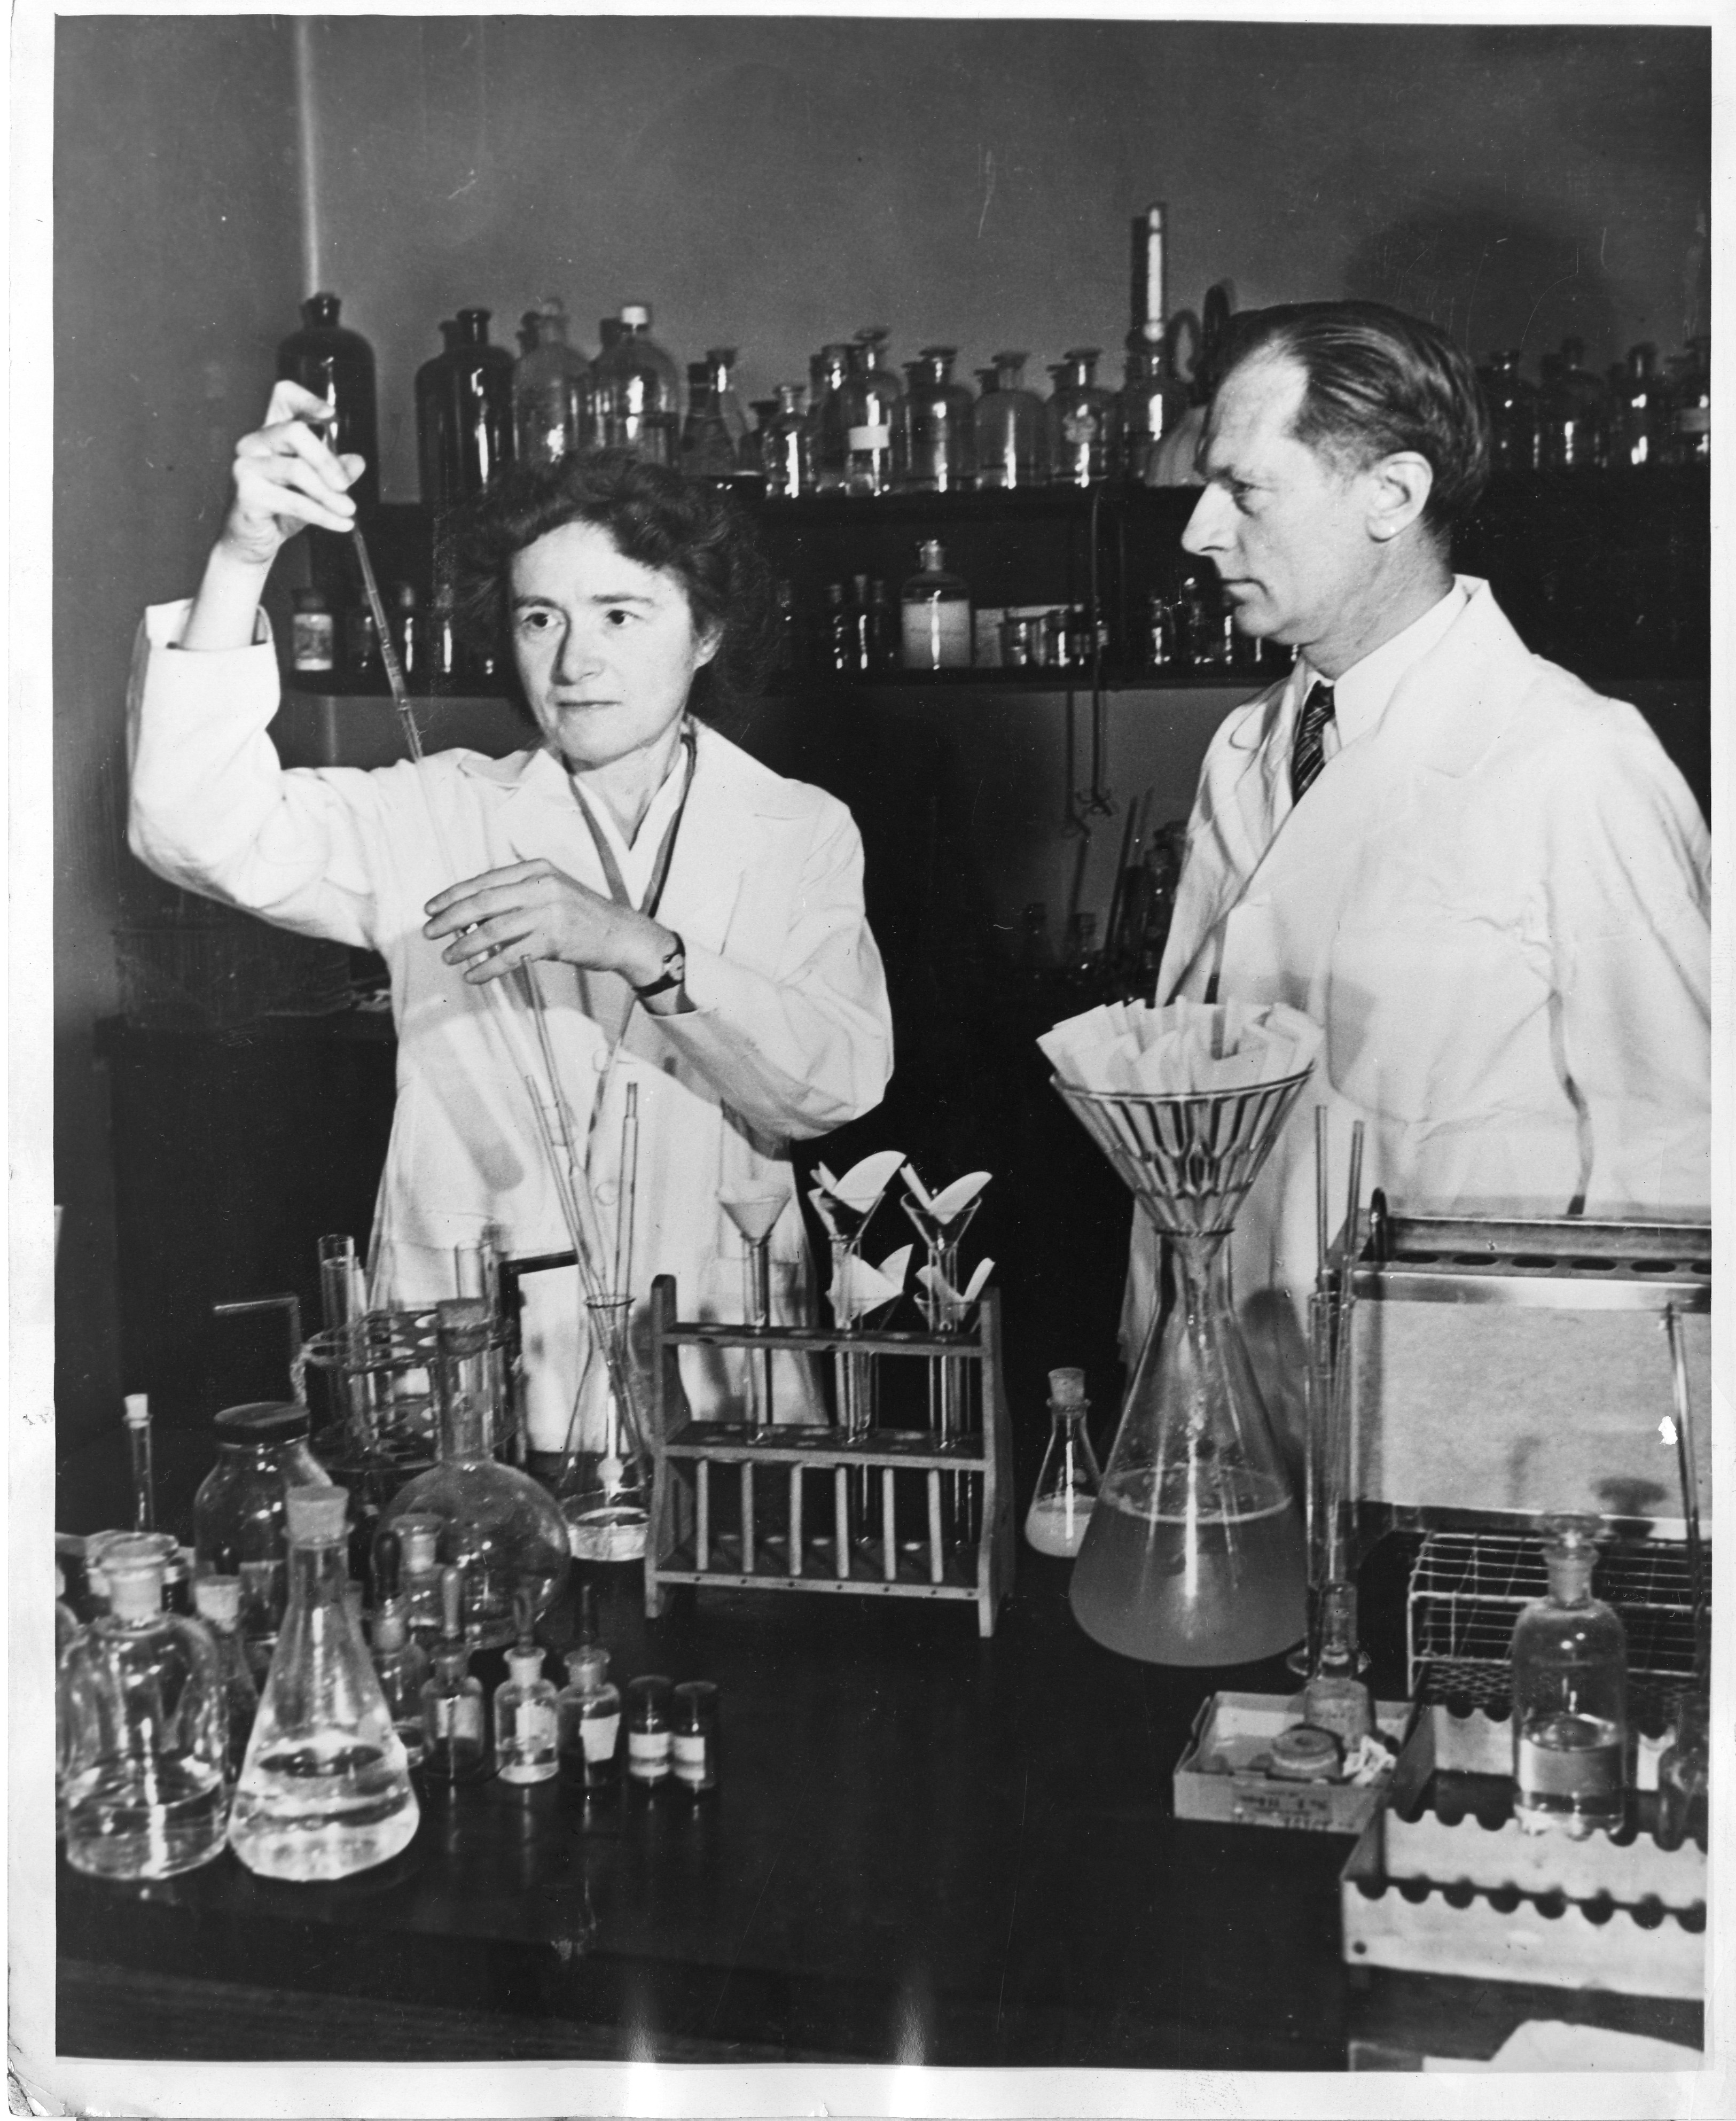 Biochemist Gerty Theresa Radnitz Cori (1896-1957) and her husband Carl Ferdinand Cori (1896-1984) were jointly awarded the Nobel Prize in medicine in 1947 for their work on how the human body metabolizes sugar.